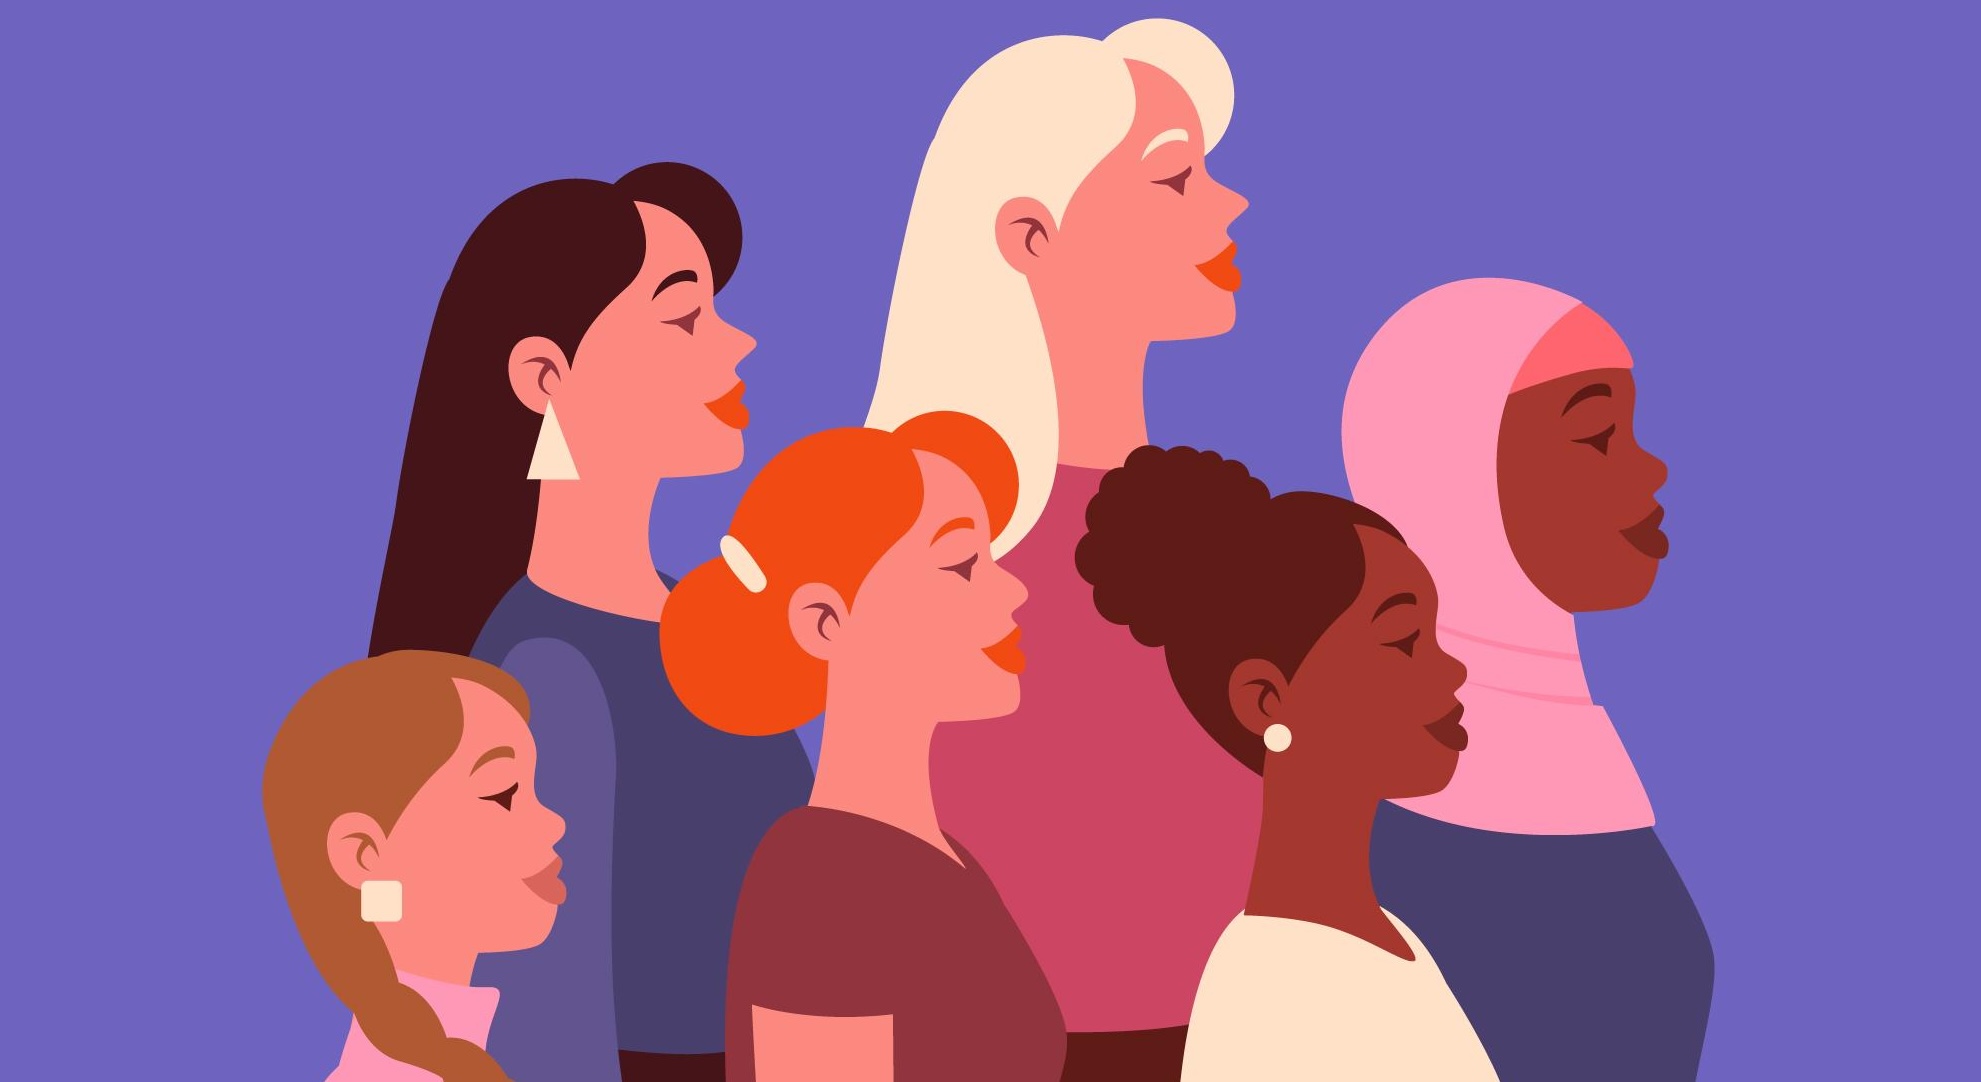 womens day importance on a purple background